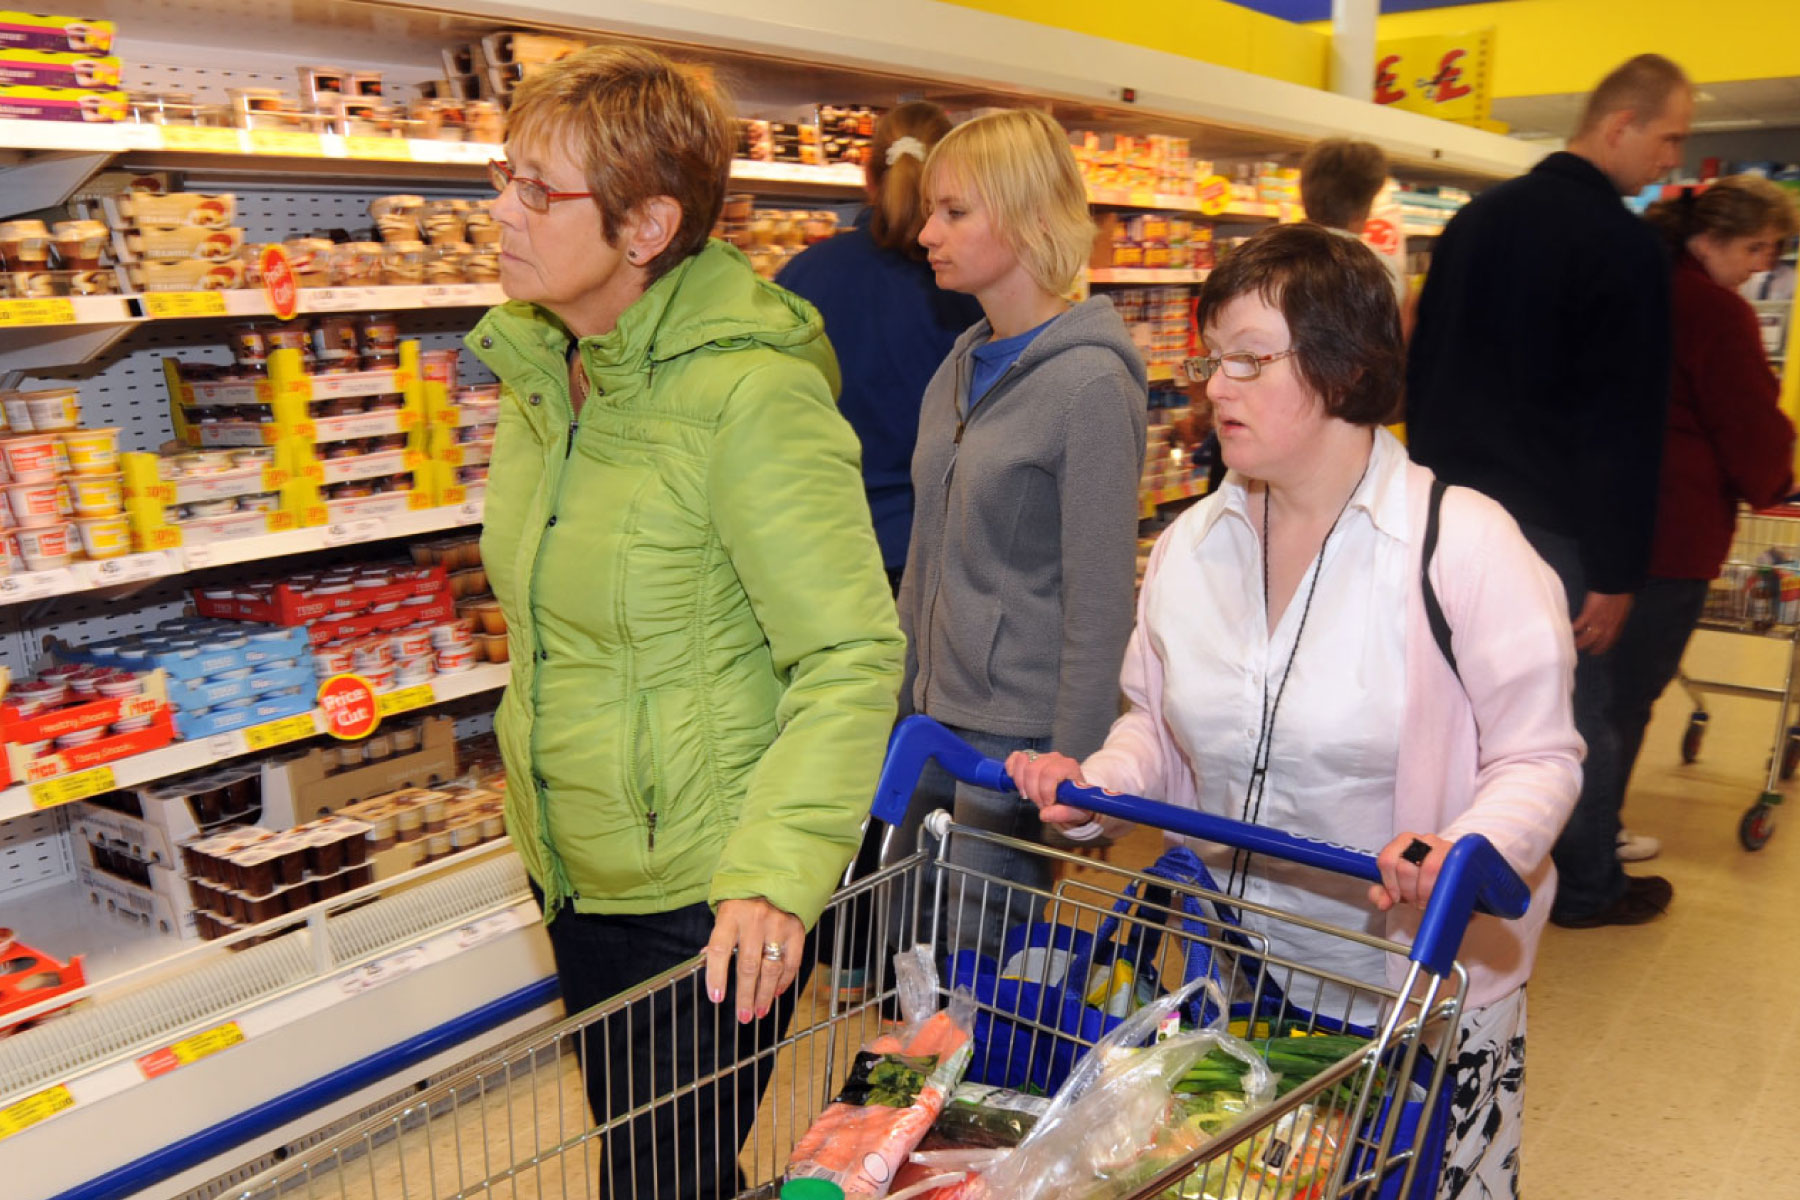 Professional carer helps two women with learning difficulties do their shopping